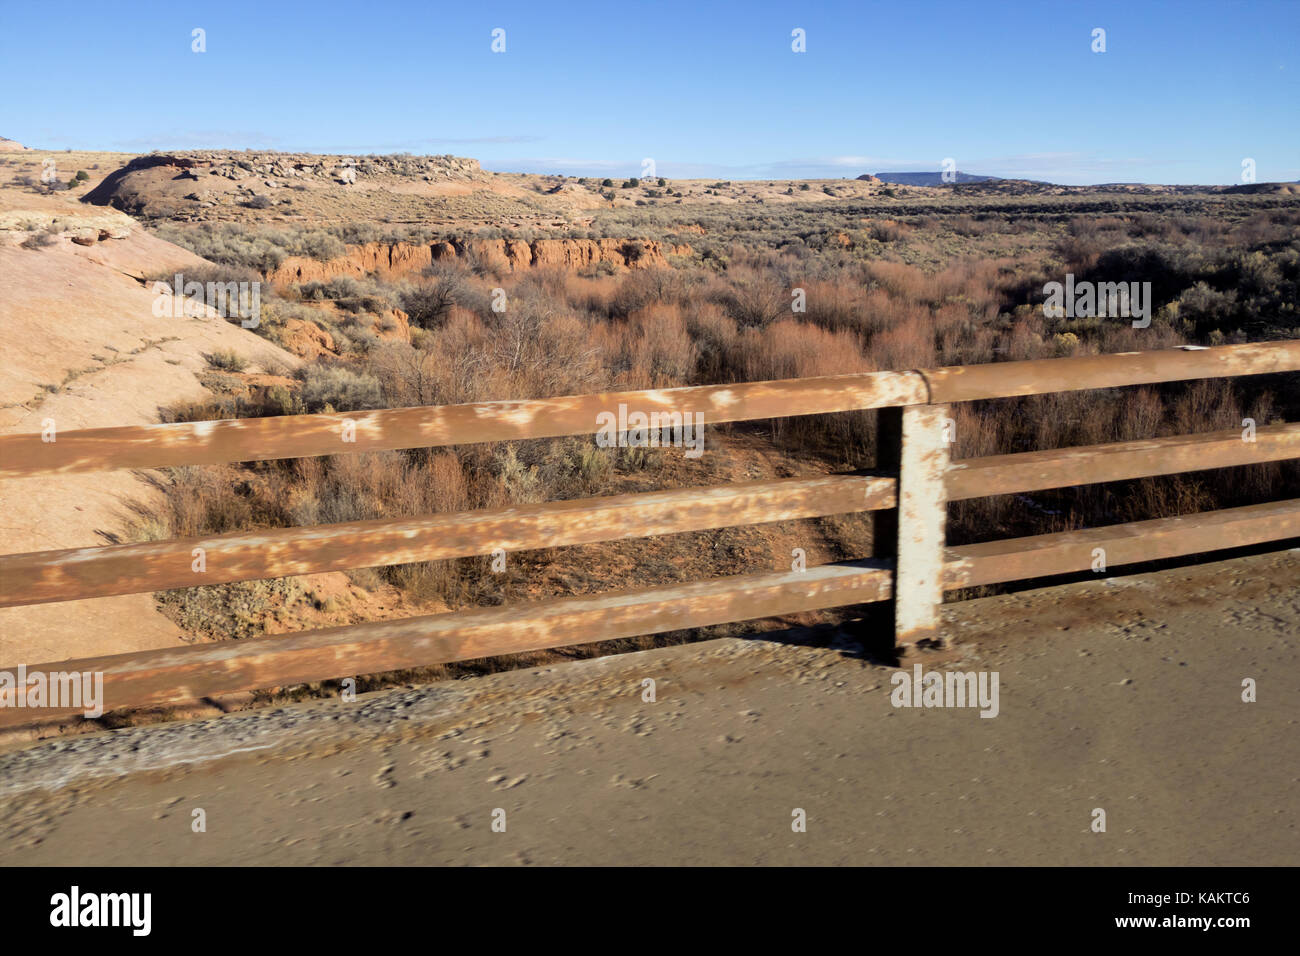 A rocky canyon filled with brush from an old bridge guard rail Stock Photo